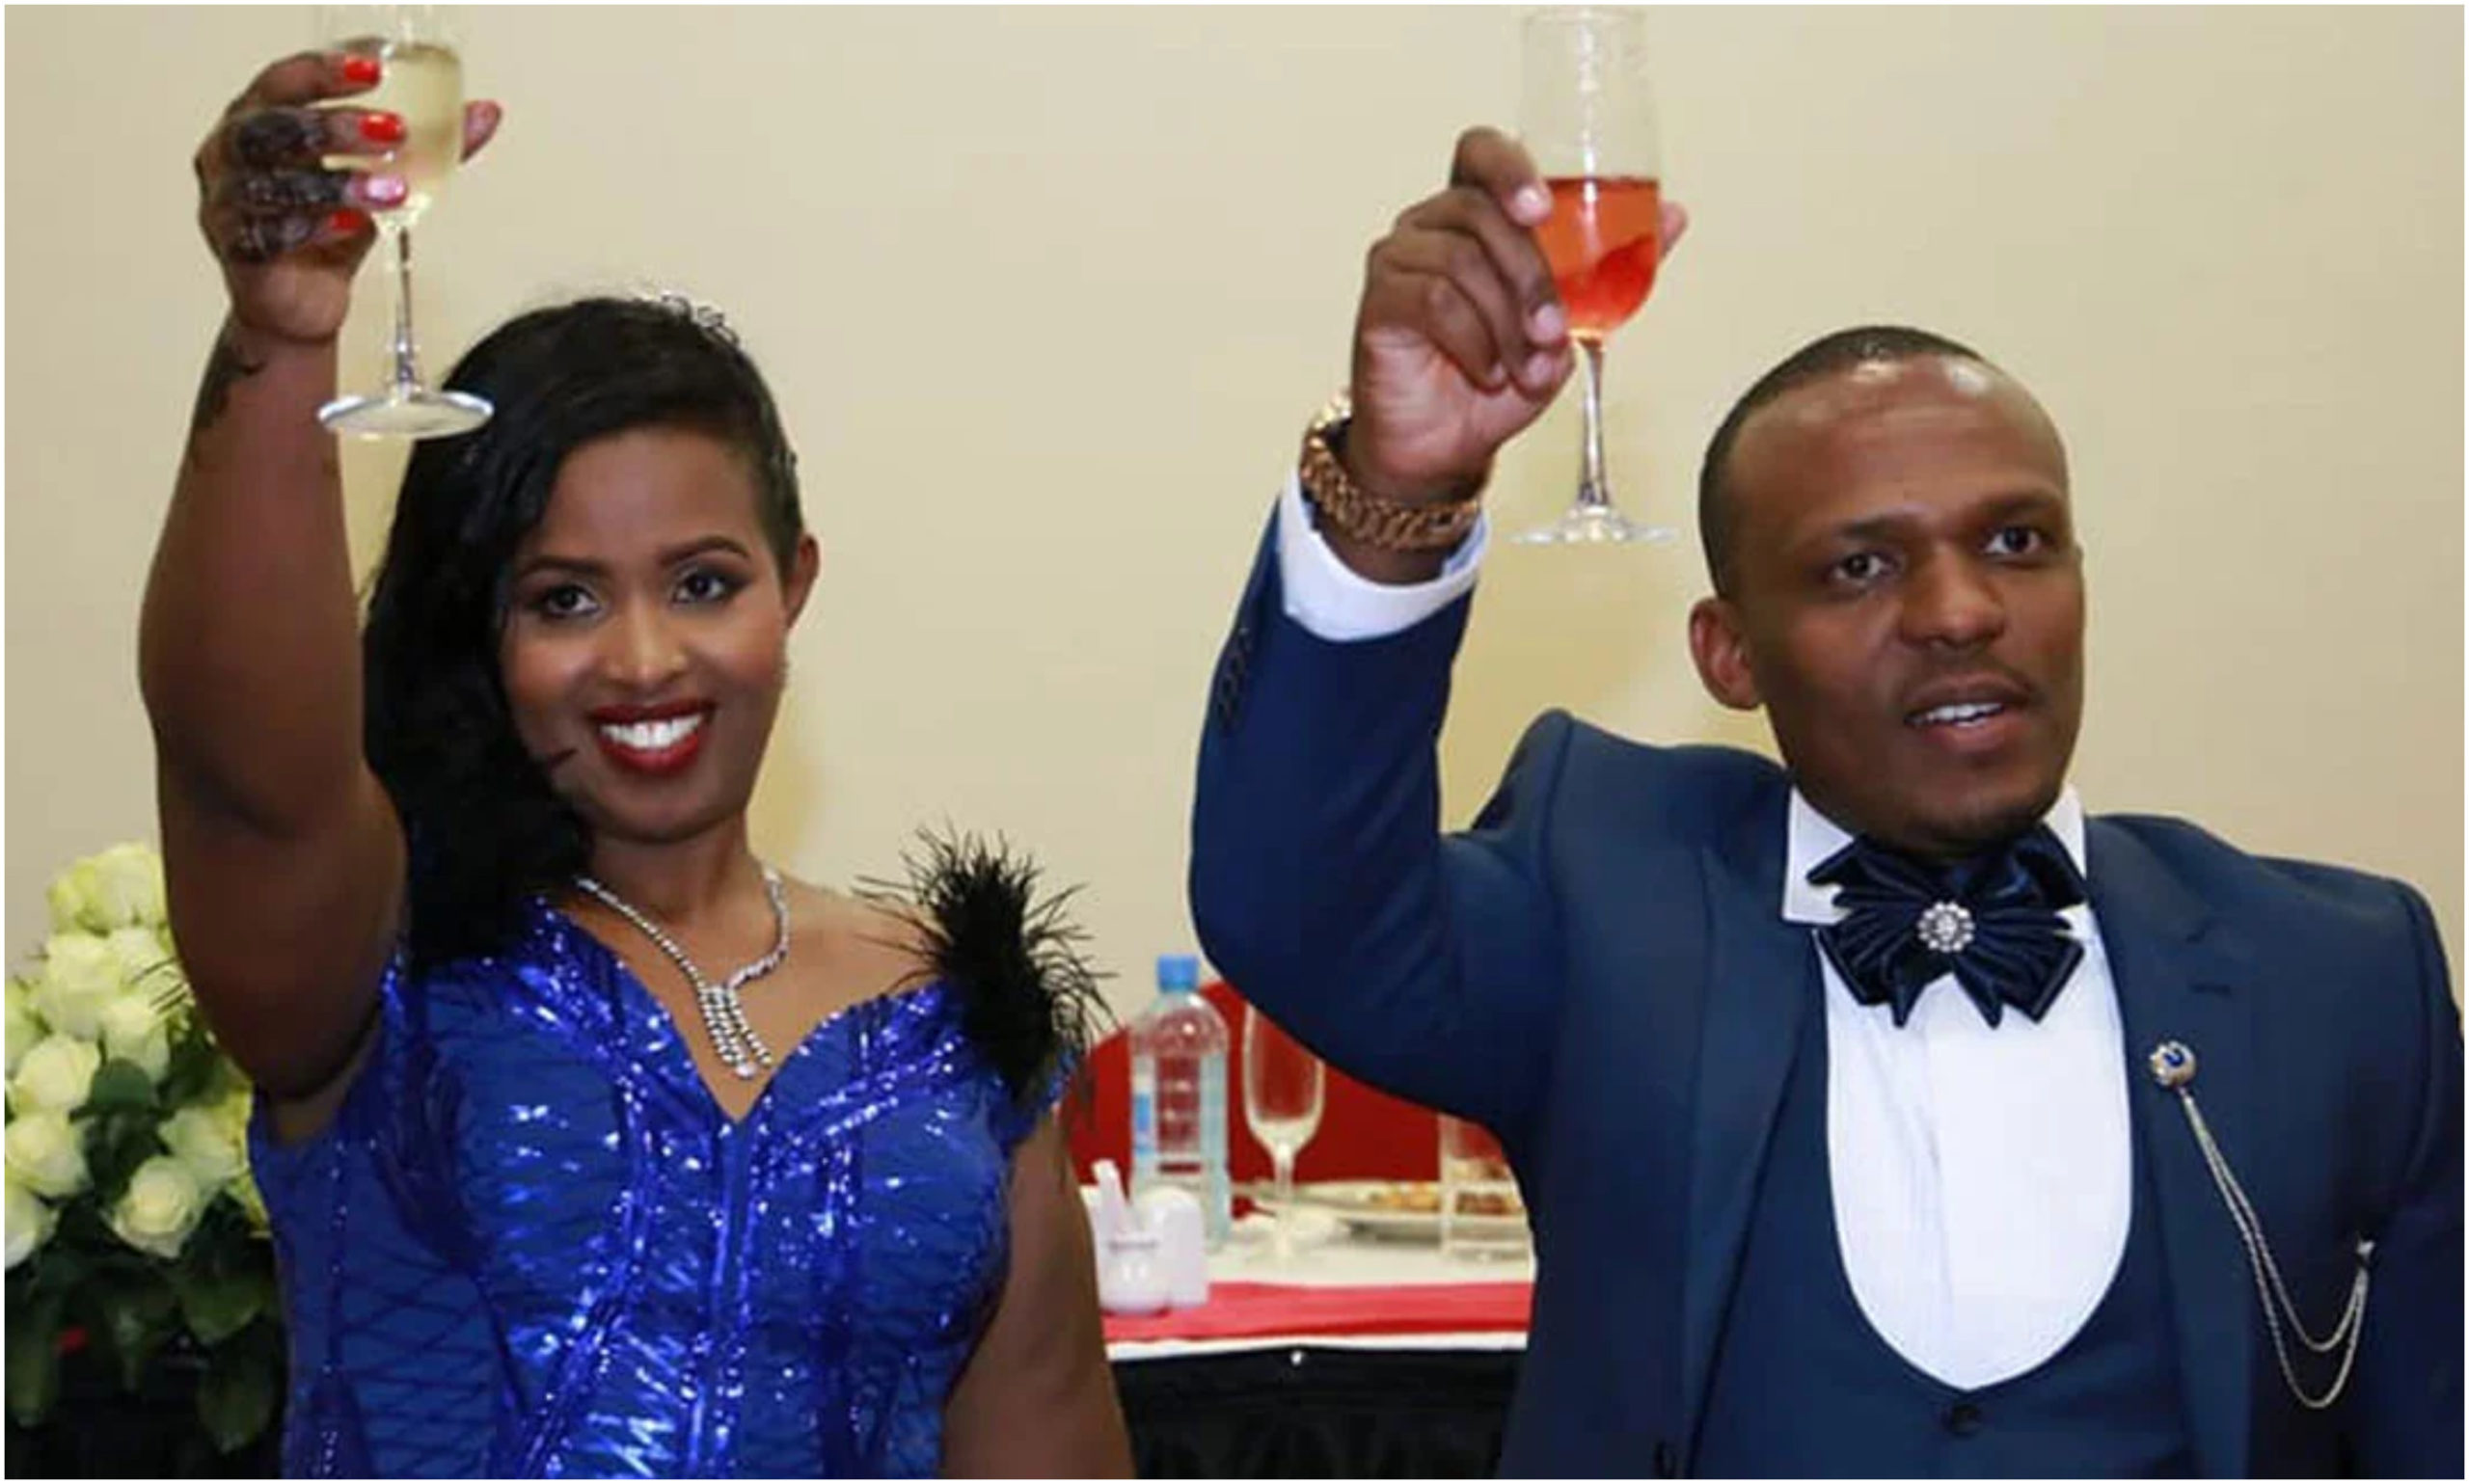 “Rona is real!” Ben Kitili and wife celebrate 2 years’ wedding anniversary in quarantine after COVID-19 infection